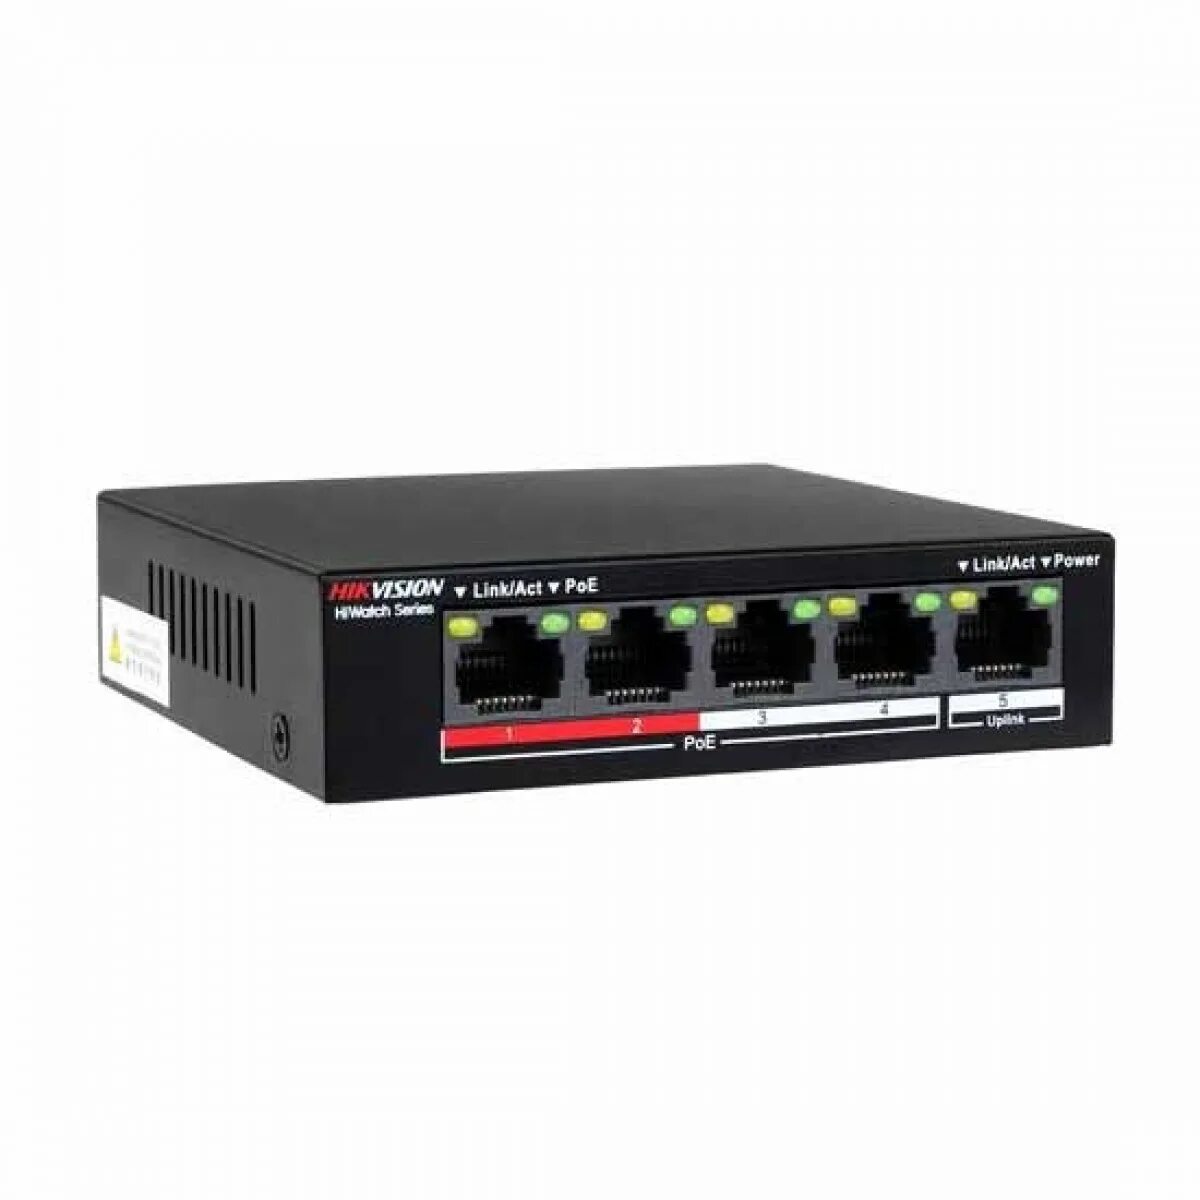 Hiwatch poe. POE Switch 4 Hikvision. POE Switch Hikvision 8. POE Switch 4 Port Hikvision. POE коммутатор HIWATCH.